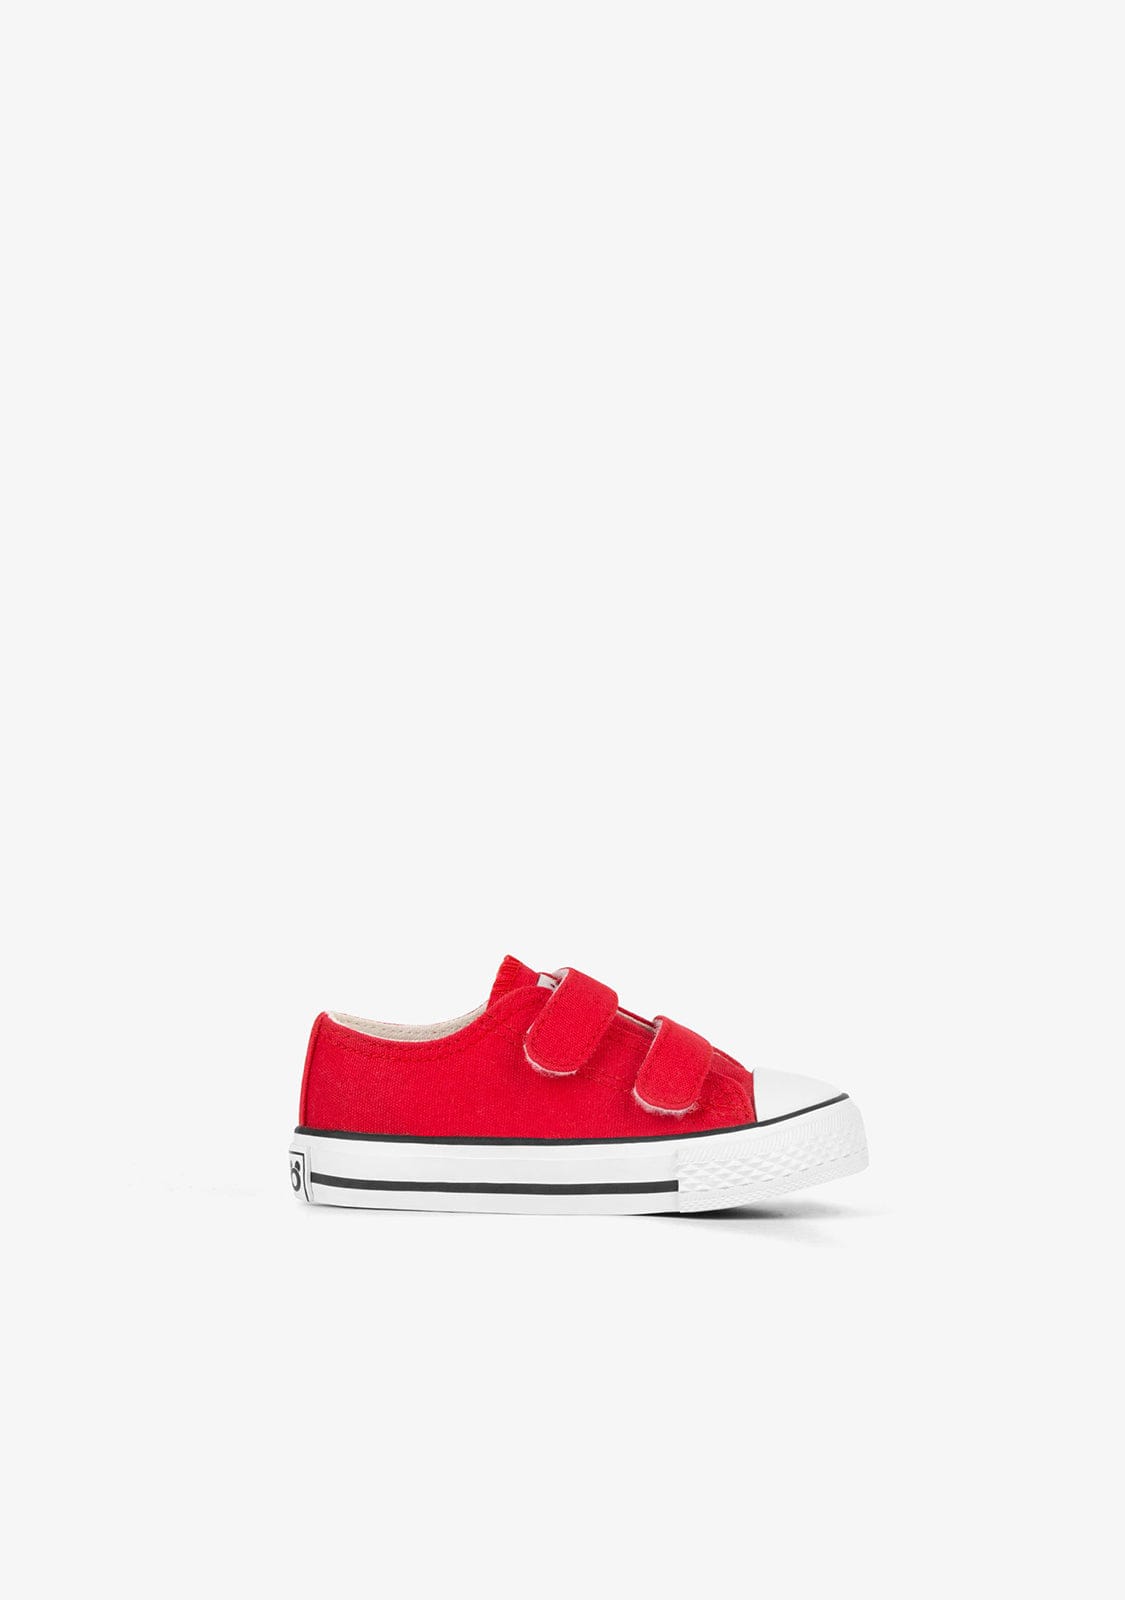 OSITO Shoes Baby's Red Basic Sneakers Canvas